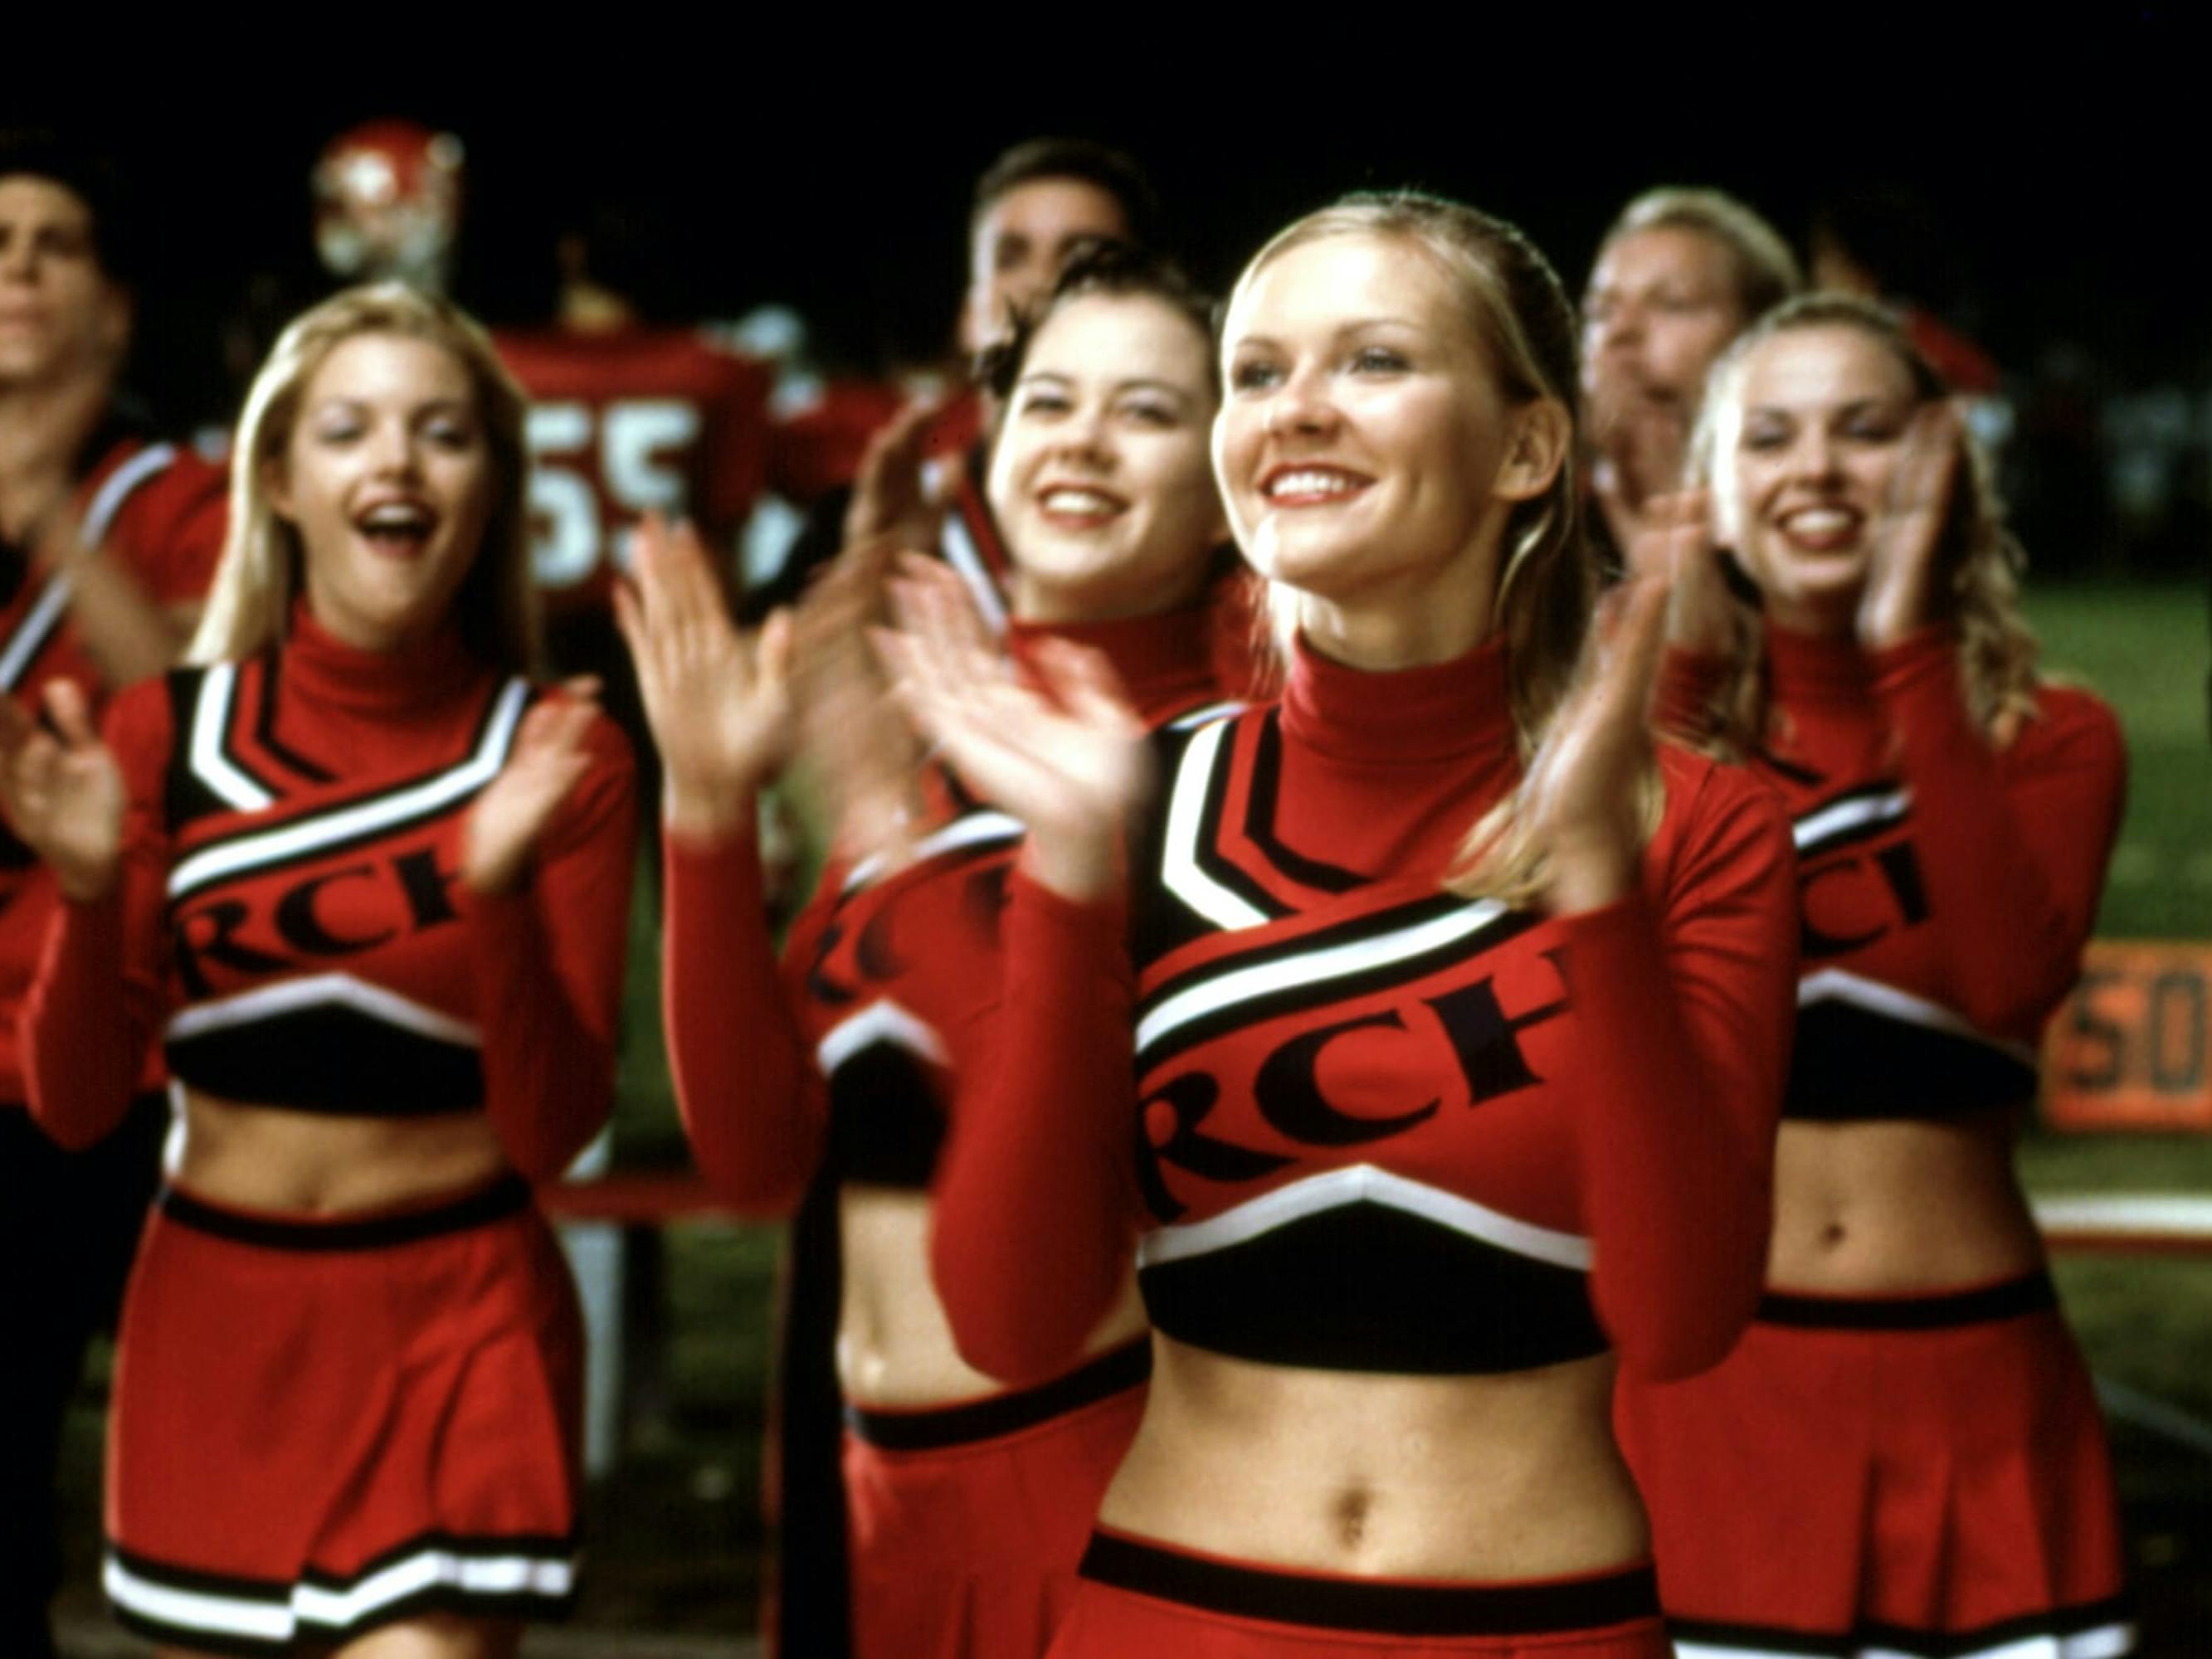 Torrance Shipman (Kirsten Dunst) cheers along with the rest of the cheerleading squad in red, black, and white uniforms.